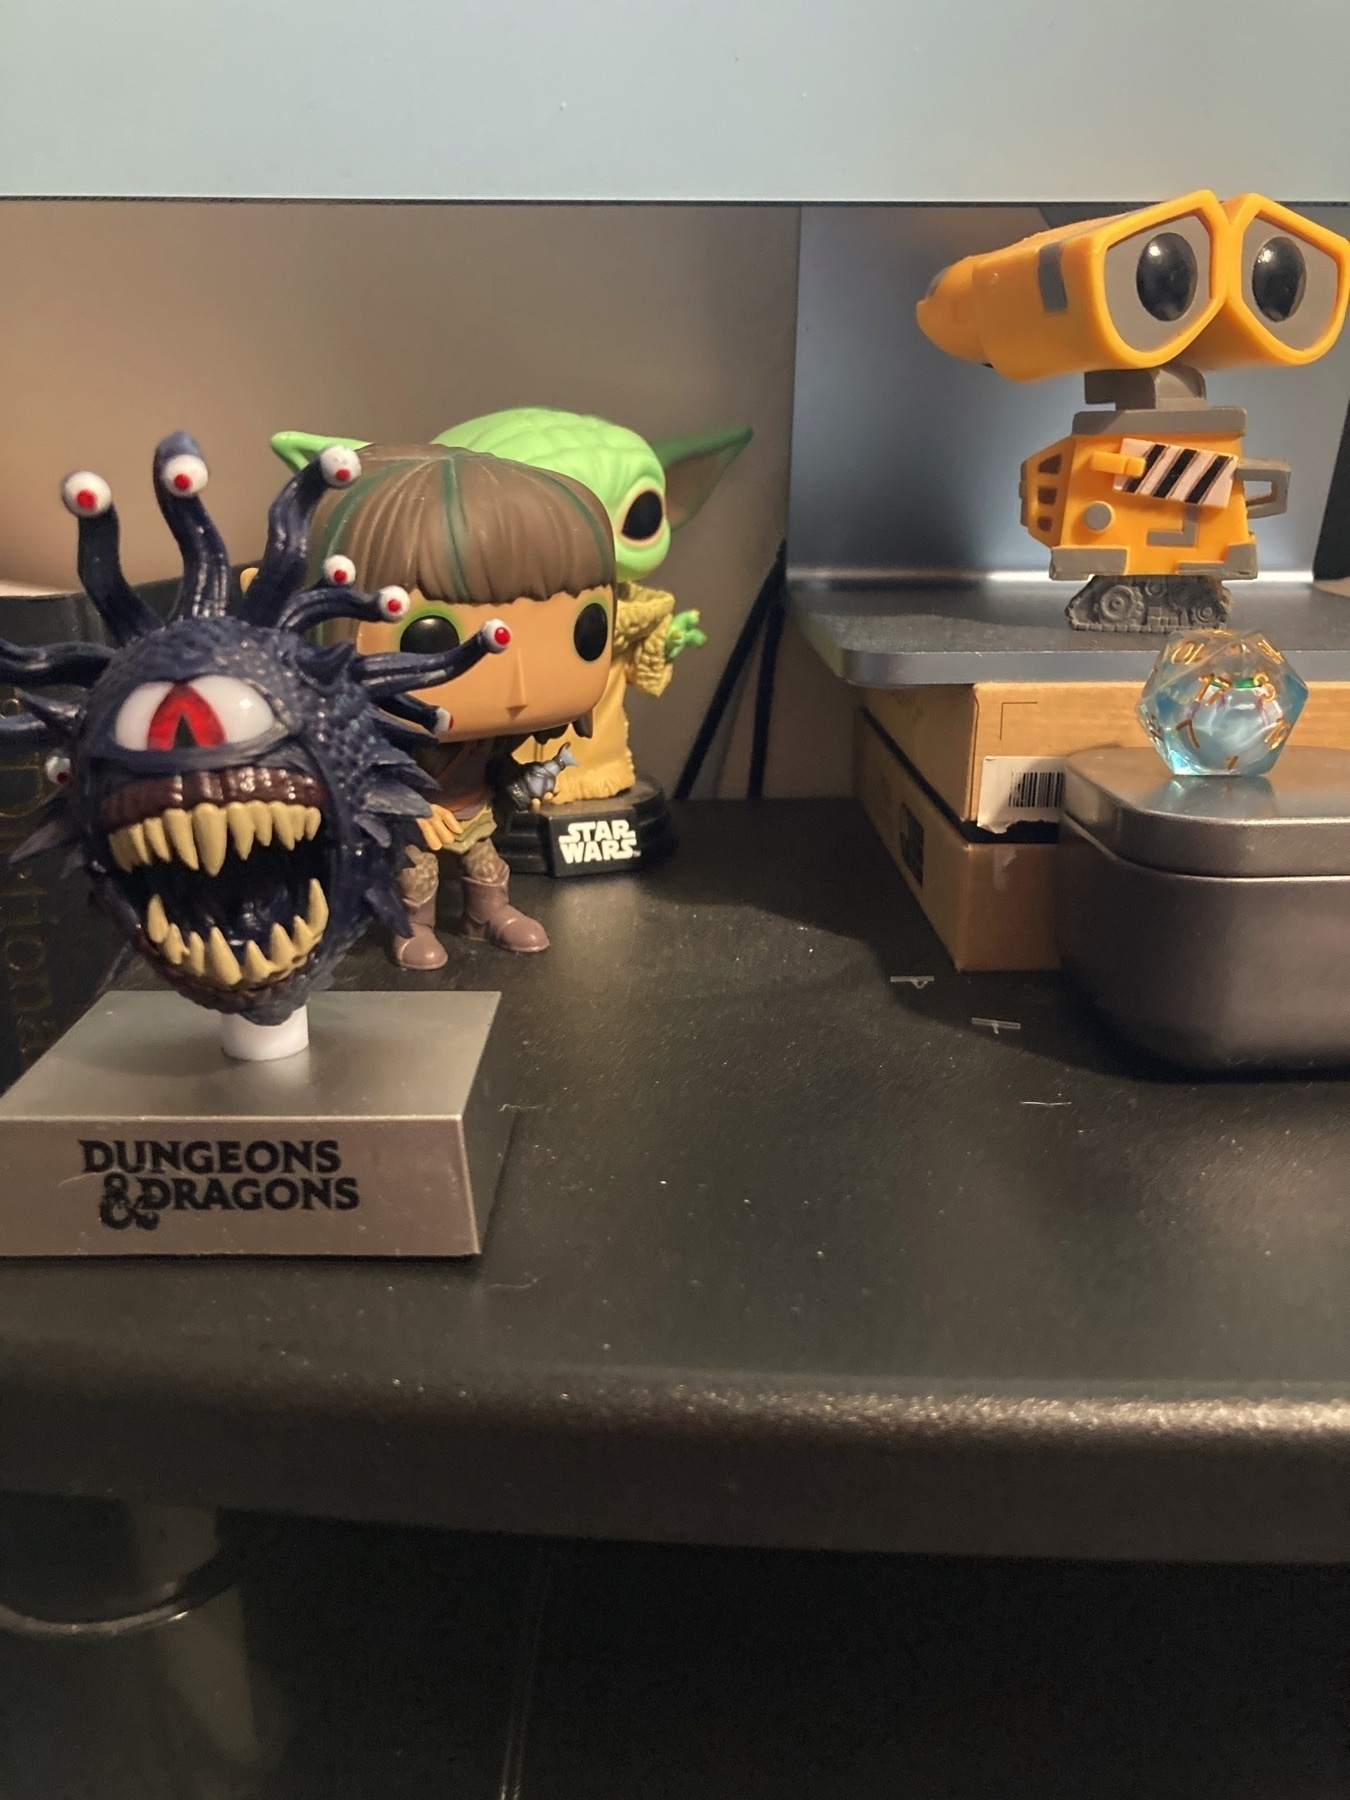 A selection of four figurines — a Beholder from Dungeons & Dragons, Rian from The Dark Crystal, Grogu from Star Wars, and Wall-E — and a die on top of a monitor stand, all positioned in front of a desktop computer.